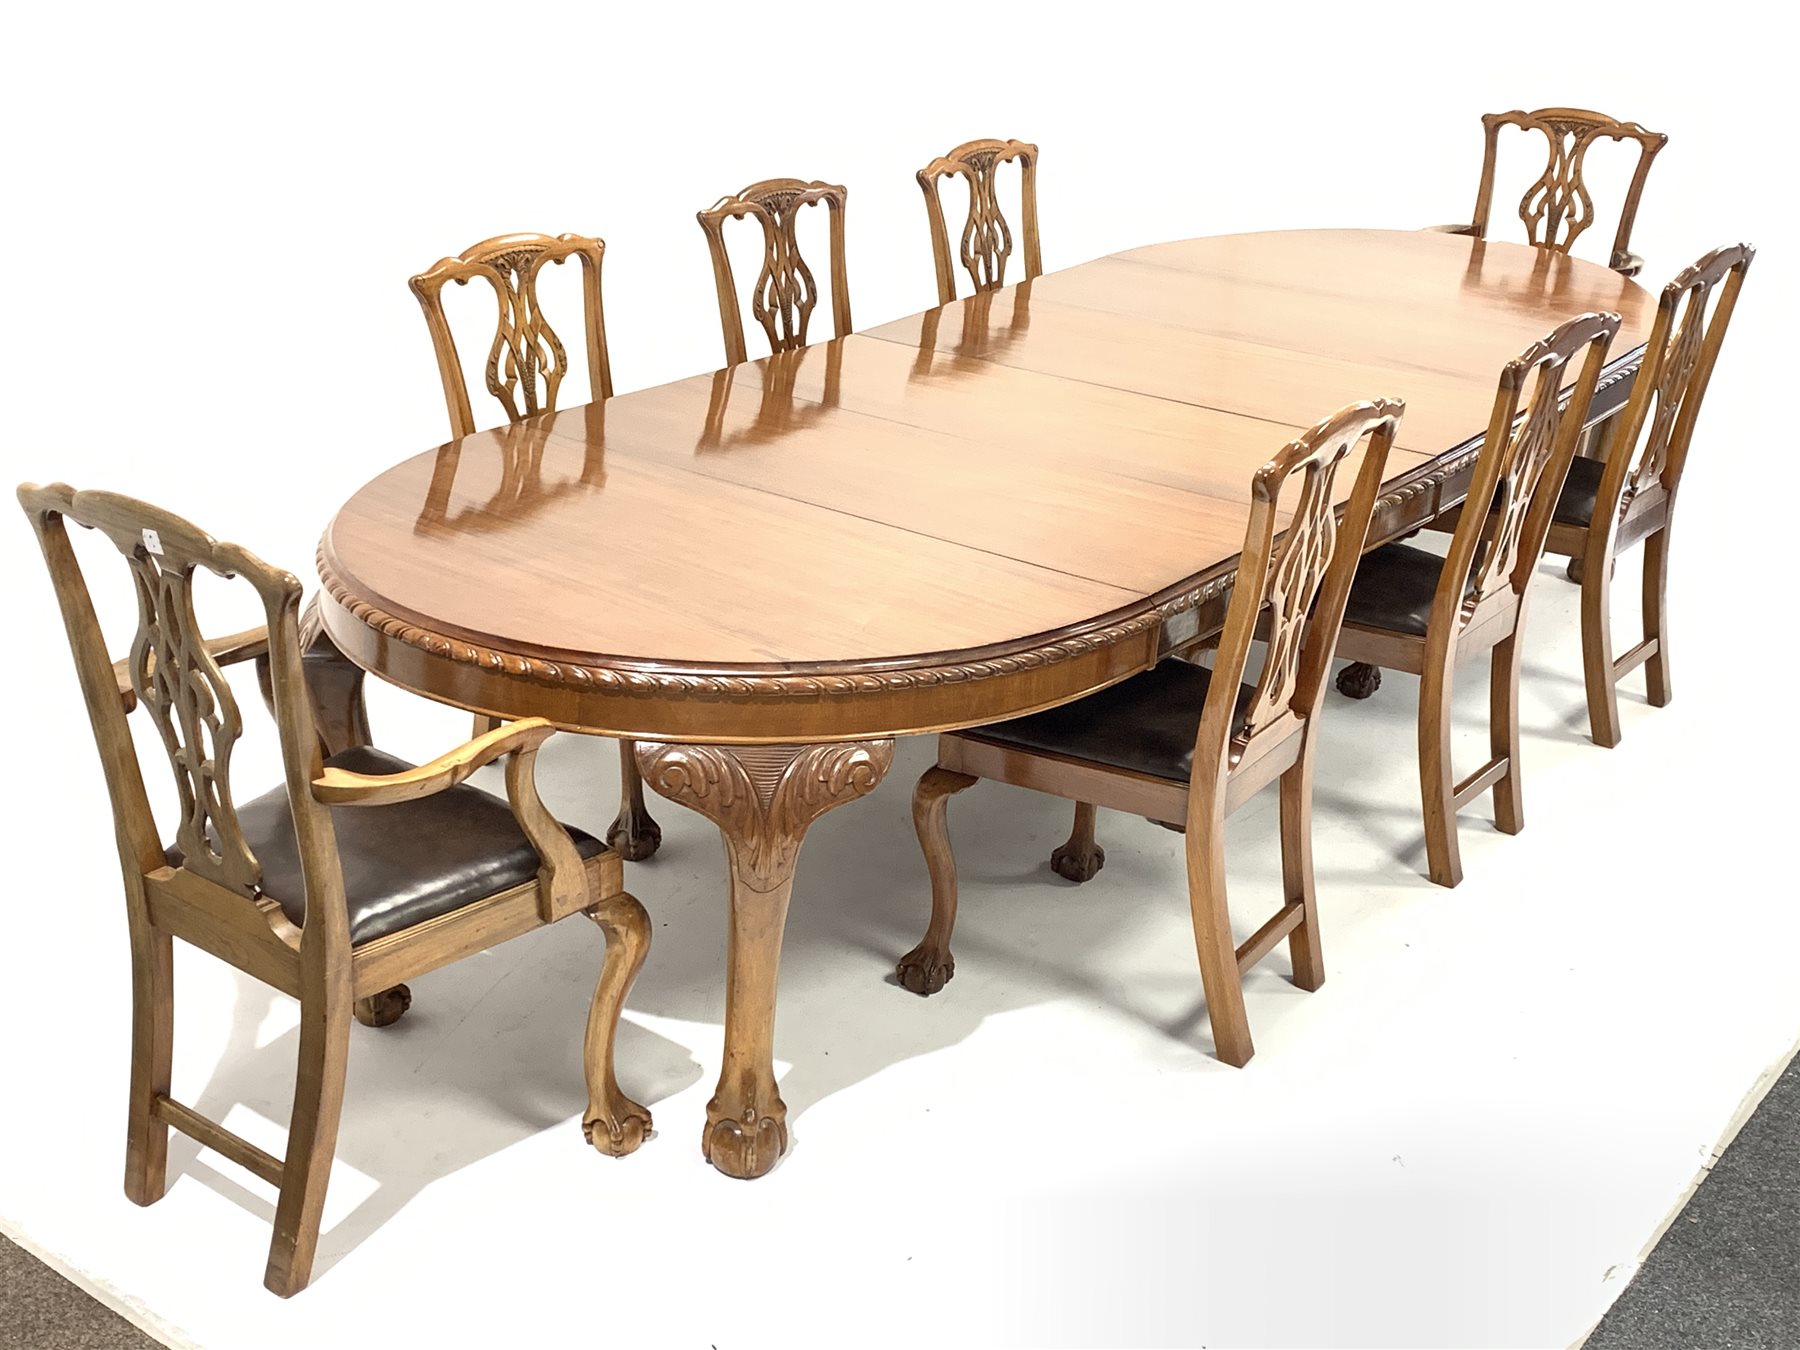 Early 20th century mahogany dining table, oval gadroon carved telescopic extending top with four add